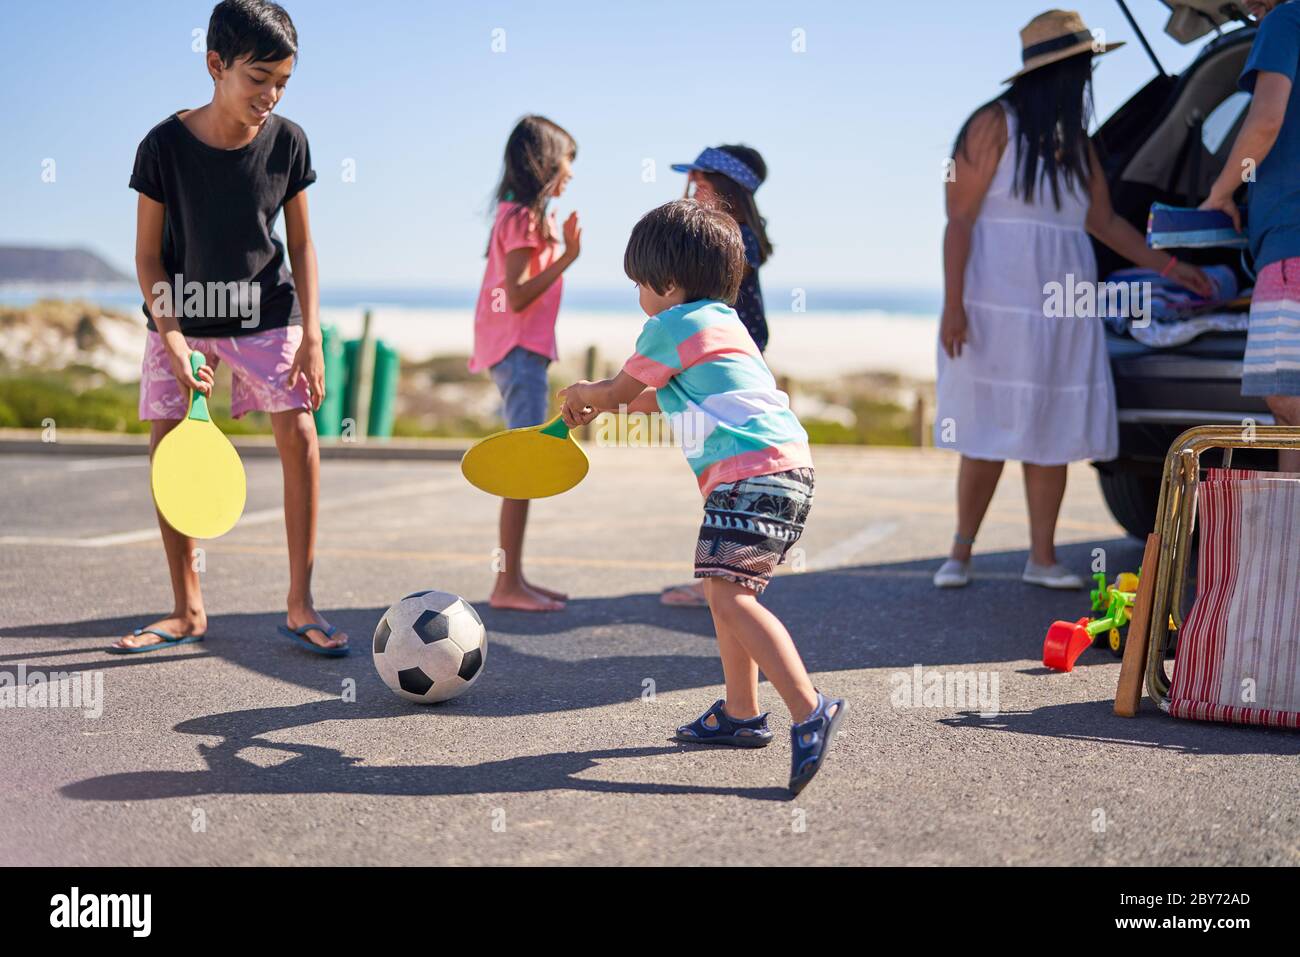 Family playing with soccer ball in beach parking lot Stock Photo